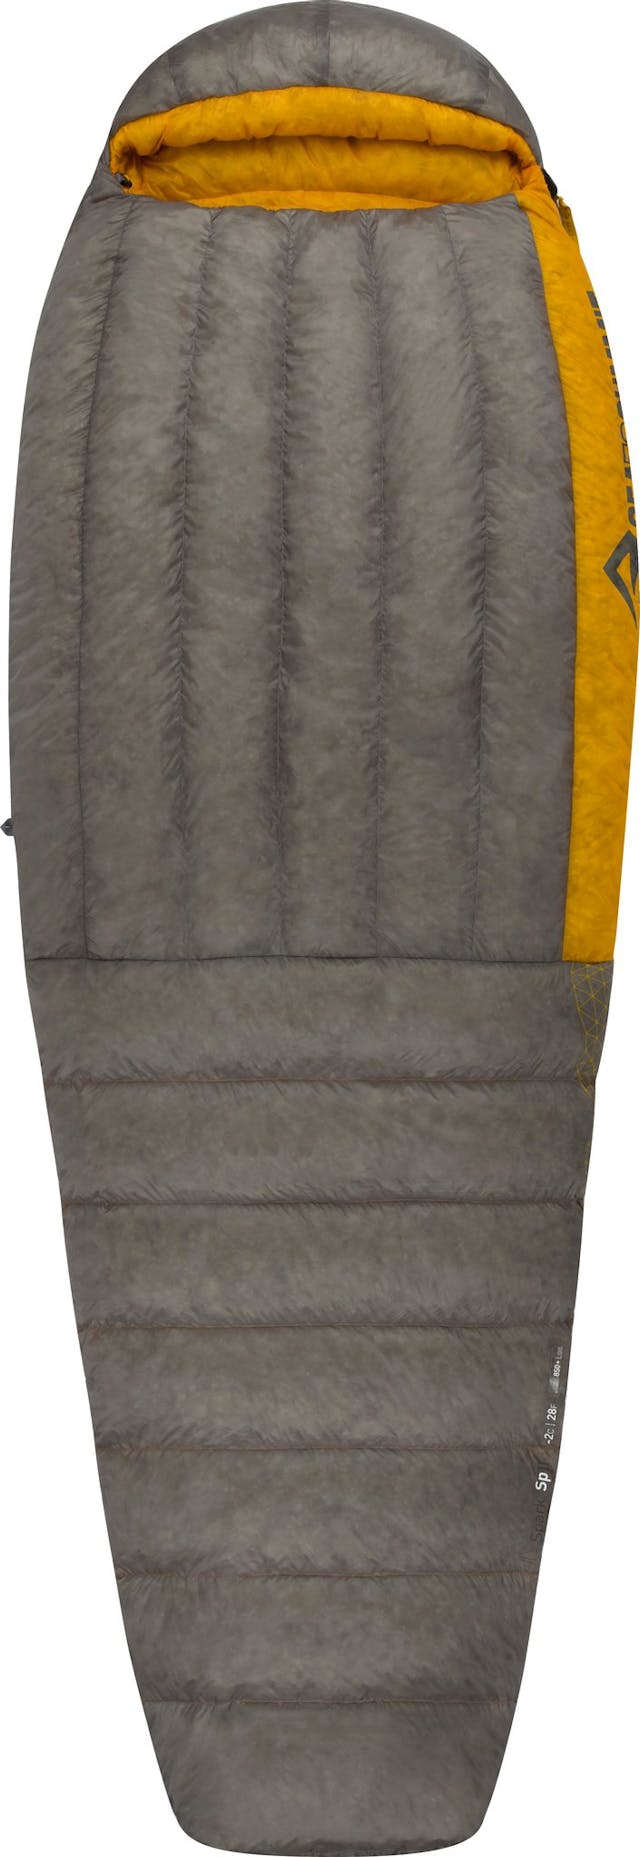 Product image for Spark Sp II Ultralight Sleeping Bag - (28°F) - Long